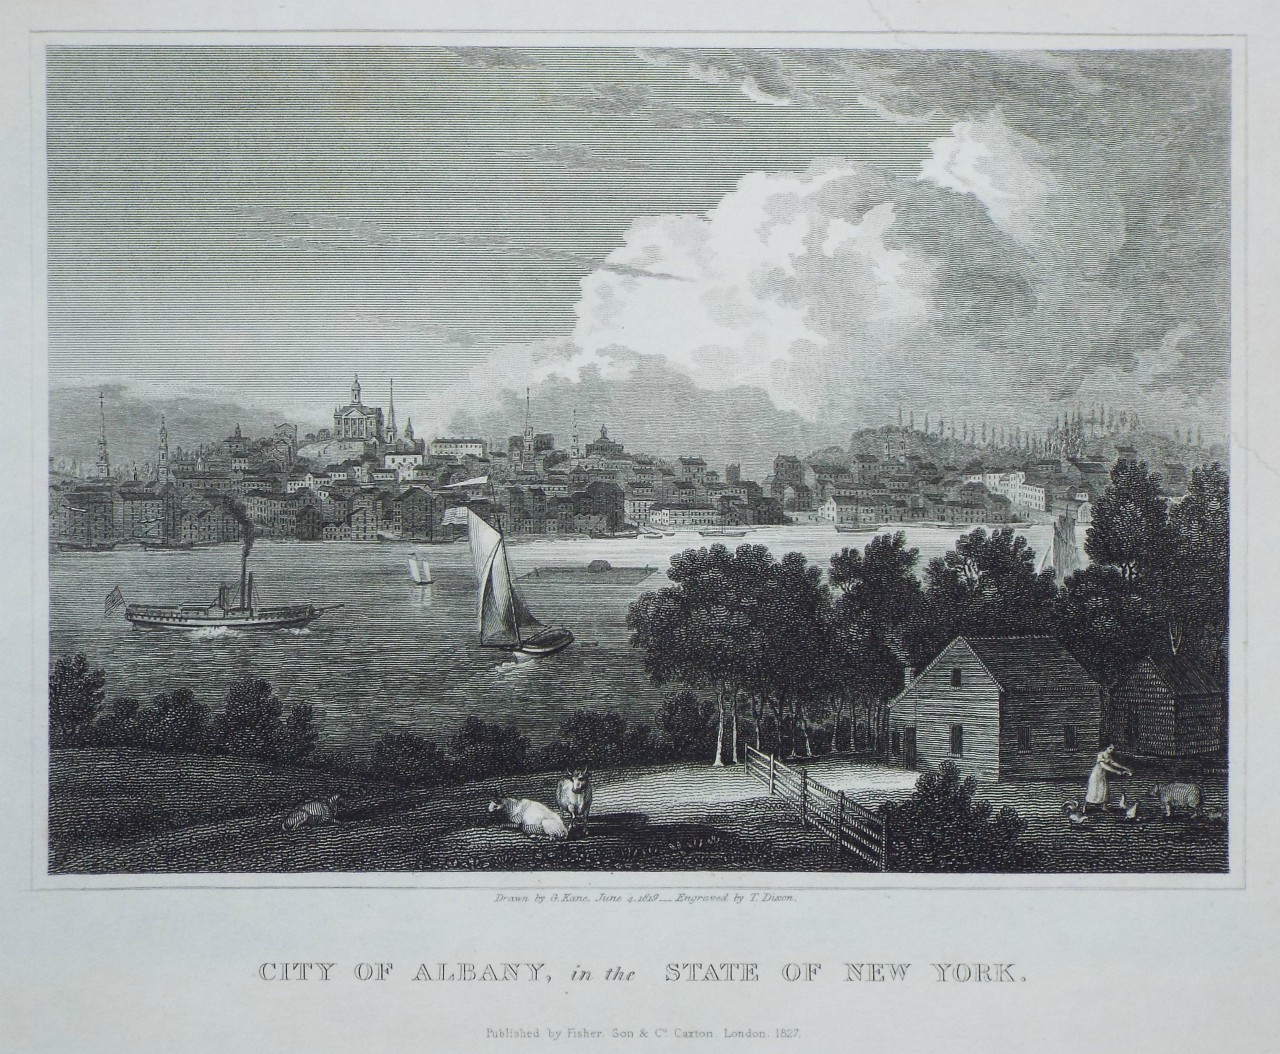 Print - City of Albany, in the State of New York. - Dixon